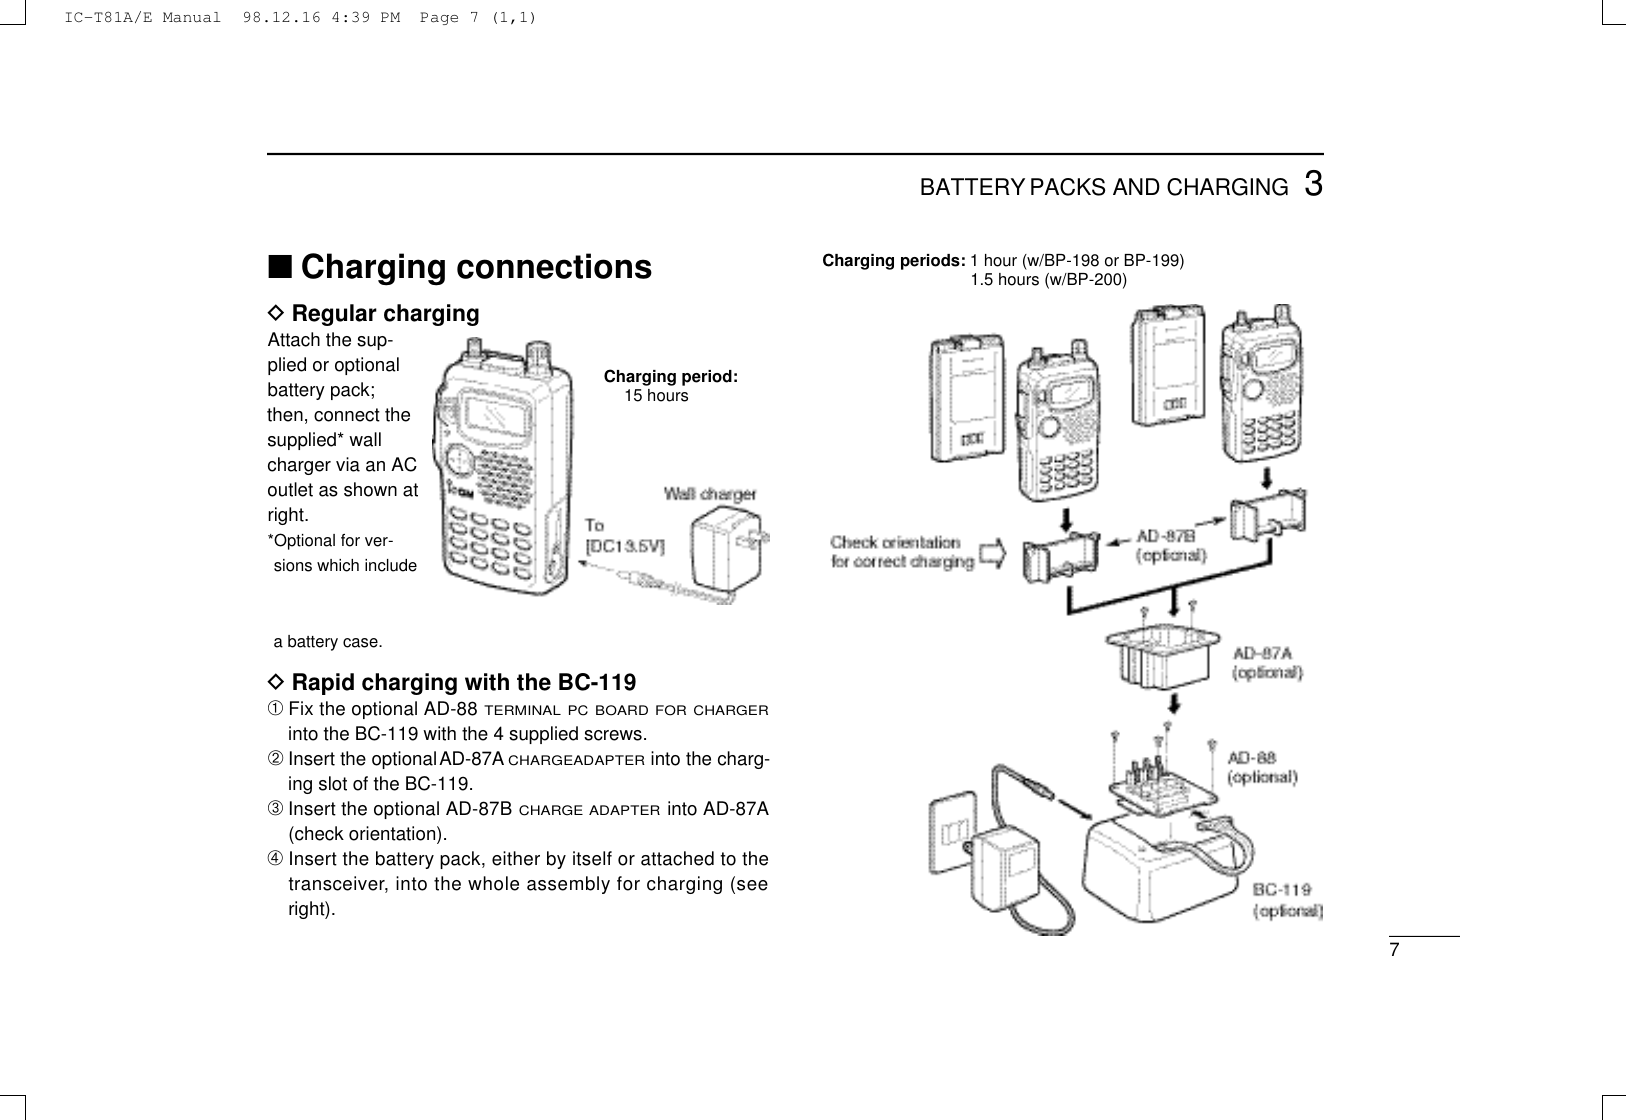 73BATTERY PACKS AND CHARGING■Charging connectionsDRegular chargingAttach the sup-plied or optionalbattery pack;then, connect thesupplied* wallcharger via an ACoutlet as shown atright.*Optional for ver-sions which includea battery case.DRapid charging with the BC-119➀Fix the optional AD-88 T E R M I N A L P C B O A R D F O R C H A R G E Rinto the BC-119 with the 4 supplied screws.➁Insert the optional A D - 8 7 AC H A R G EA D A P T E Rinto the charg-ing slot of the BC-119.➂Insert the optional AD-87B C H A R G E A D A P T E Rinto A D - 8 7 A(check orientation).➃Insert the battery pack, either by itself or attached to thet r a n s c e i v e r, into the whole assembly for charging (seeright).Charging period:15 hoursCharging periods: 1 hour (w/BP-198 or BP-199)1.5 hours (w/BP-200)IC-T81A/E Manual  98.12.16 4:39 PM  Page 7 (1,1)